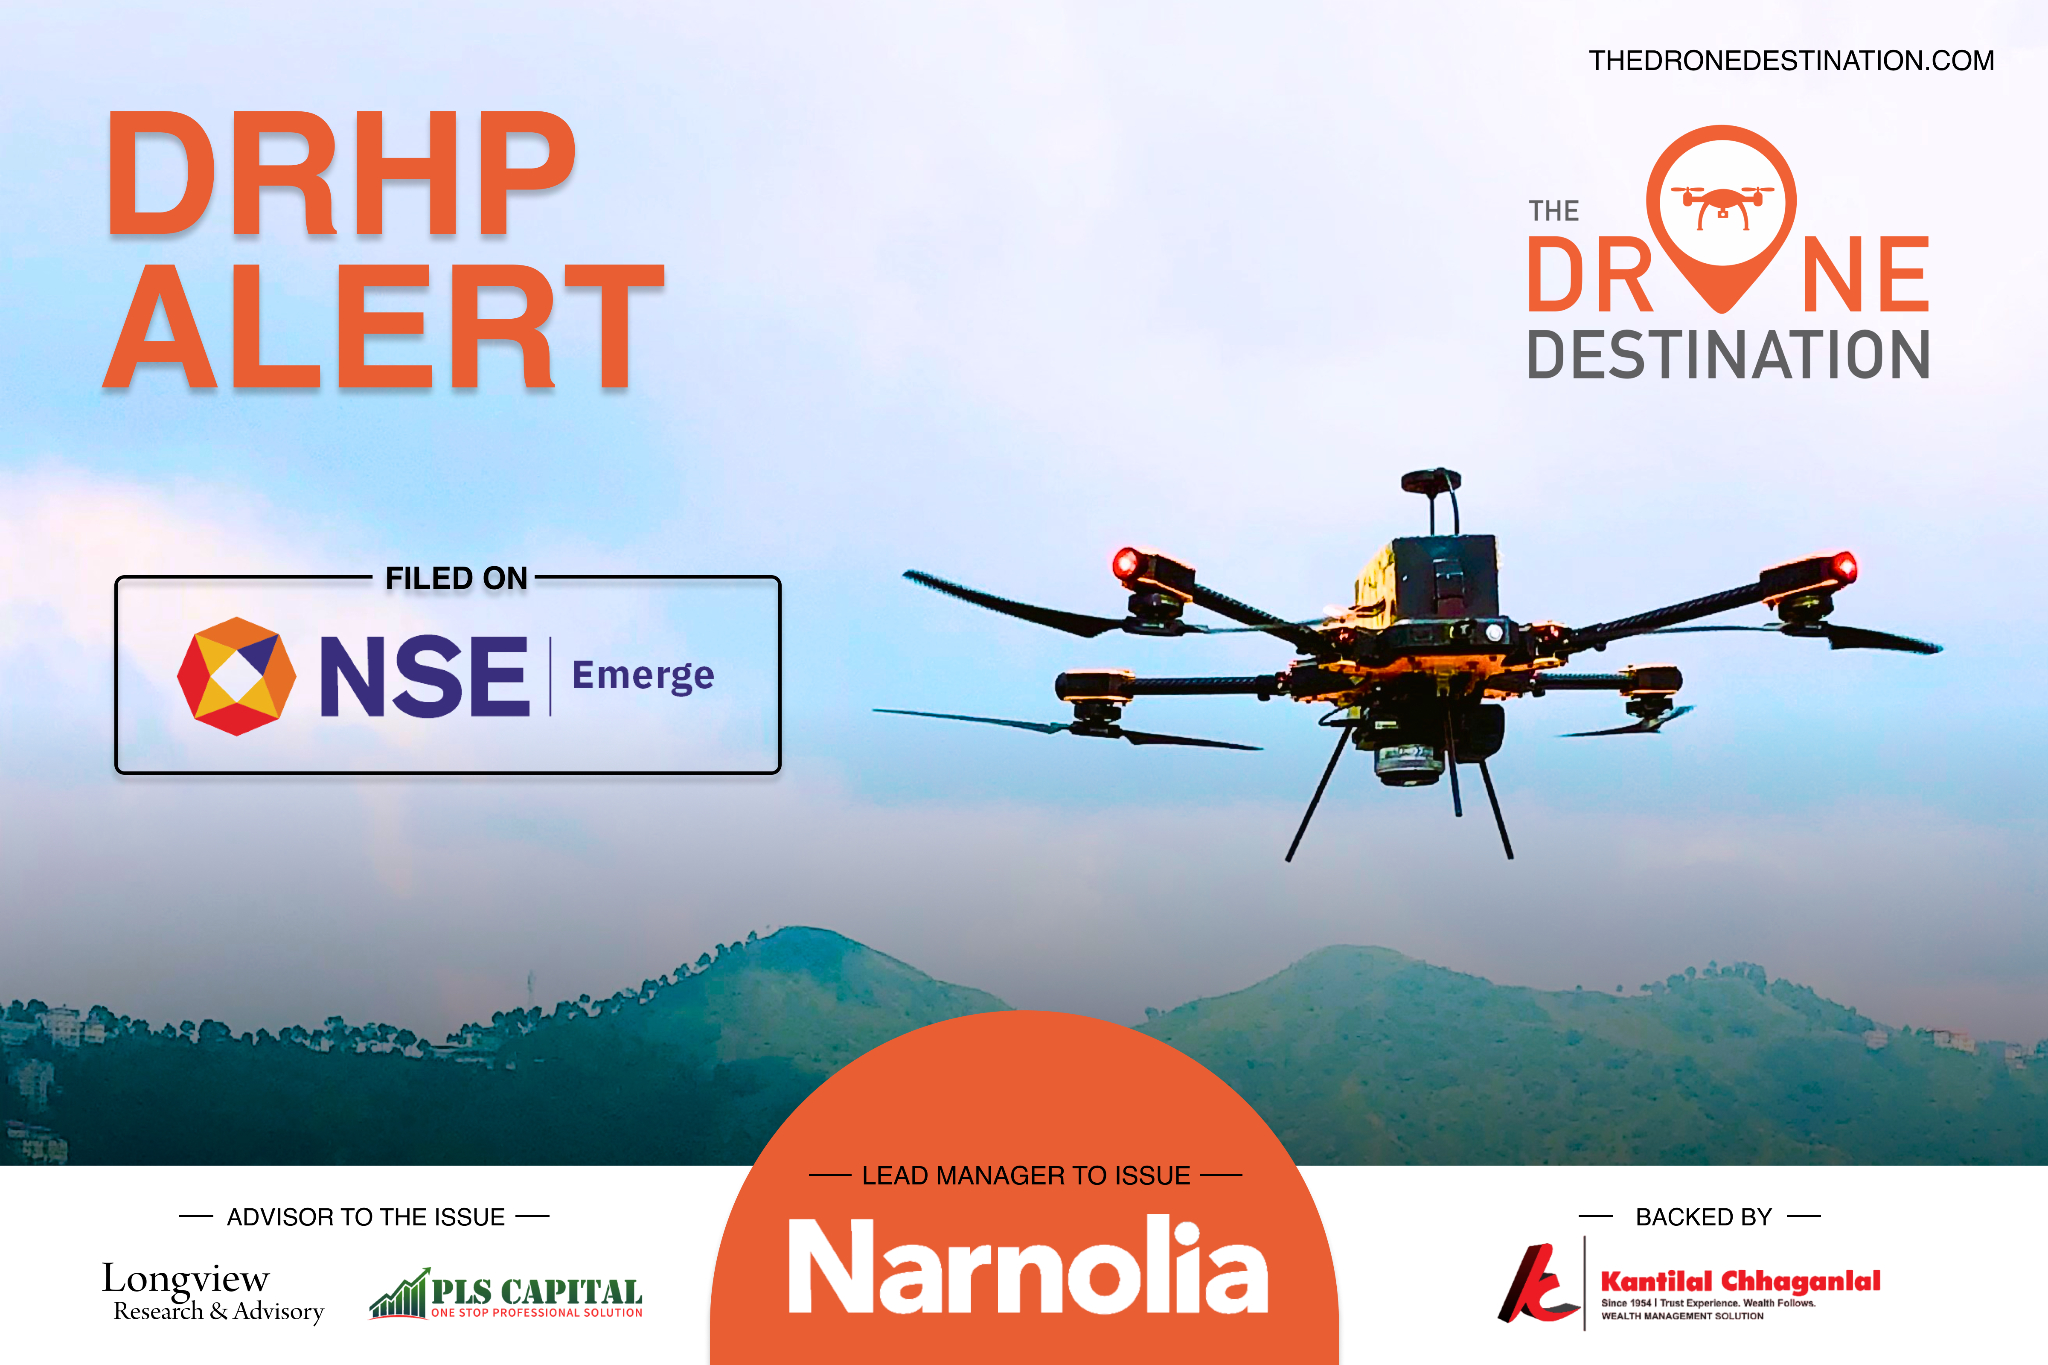 Drone Destination – India’s largest Drone Training Organization and a leading Drone-as-a-Service company sets course for Growth, Files DRHP with NSE Emerge